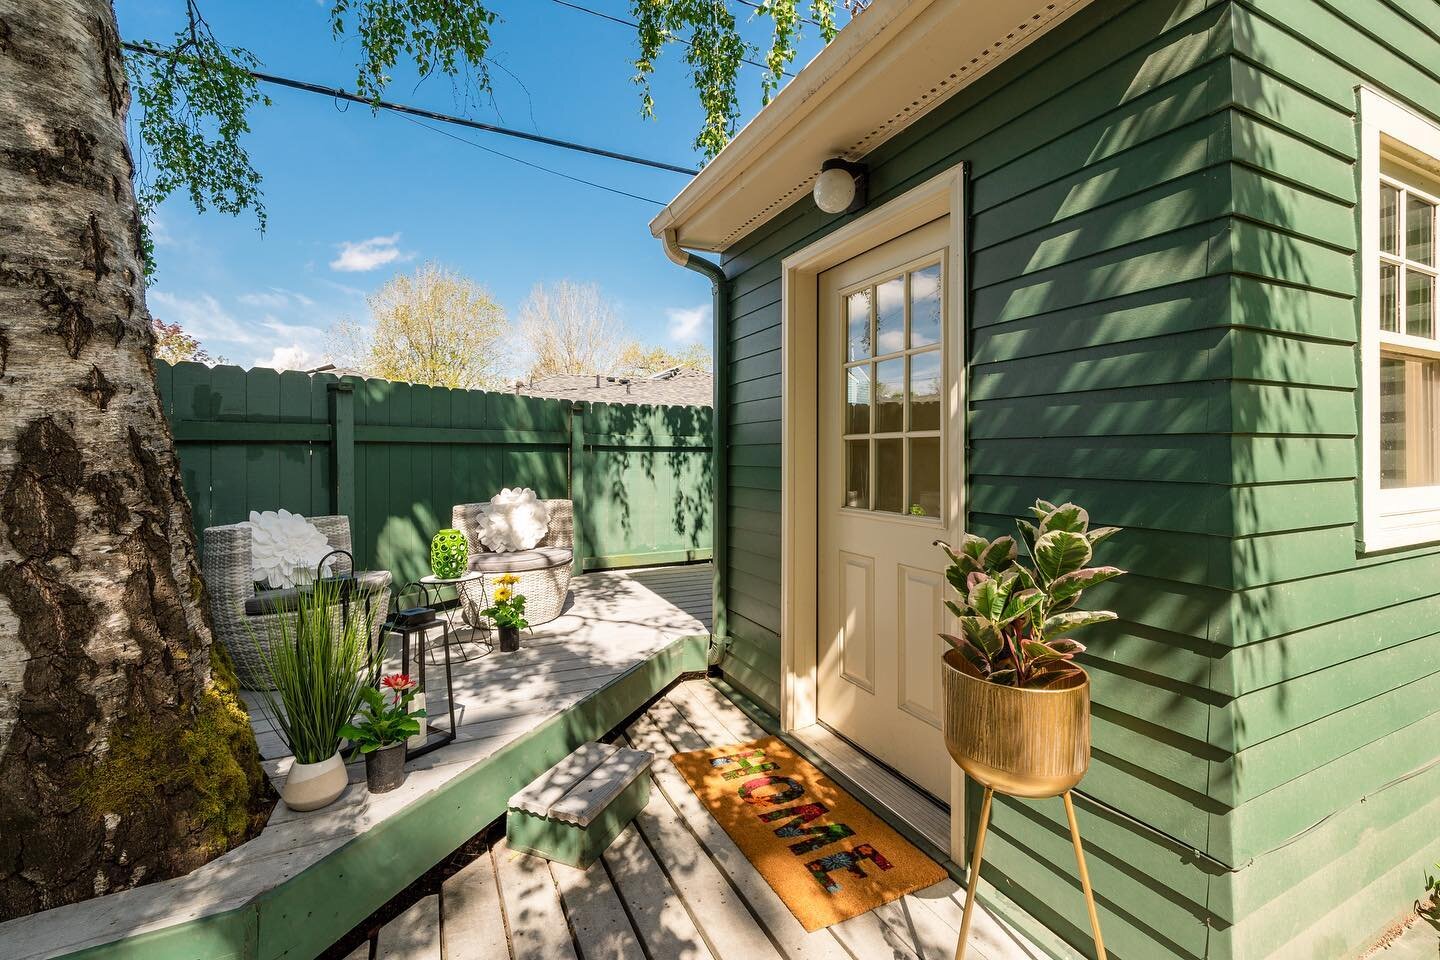 Did you know we stage outdoor spaces too?? 🌺This charming home had a backyard with several areas perfect for relaxing and entertaining and we helped the agent and homeowner show them off!!
#stagingsells #salemoregon #staginghomes